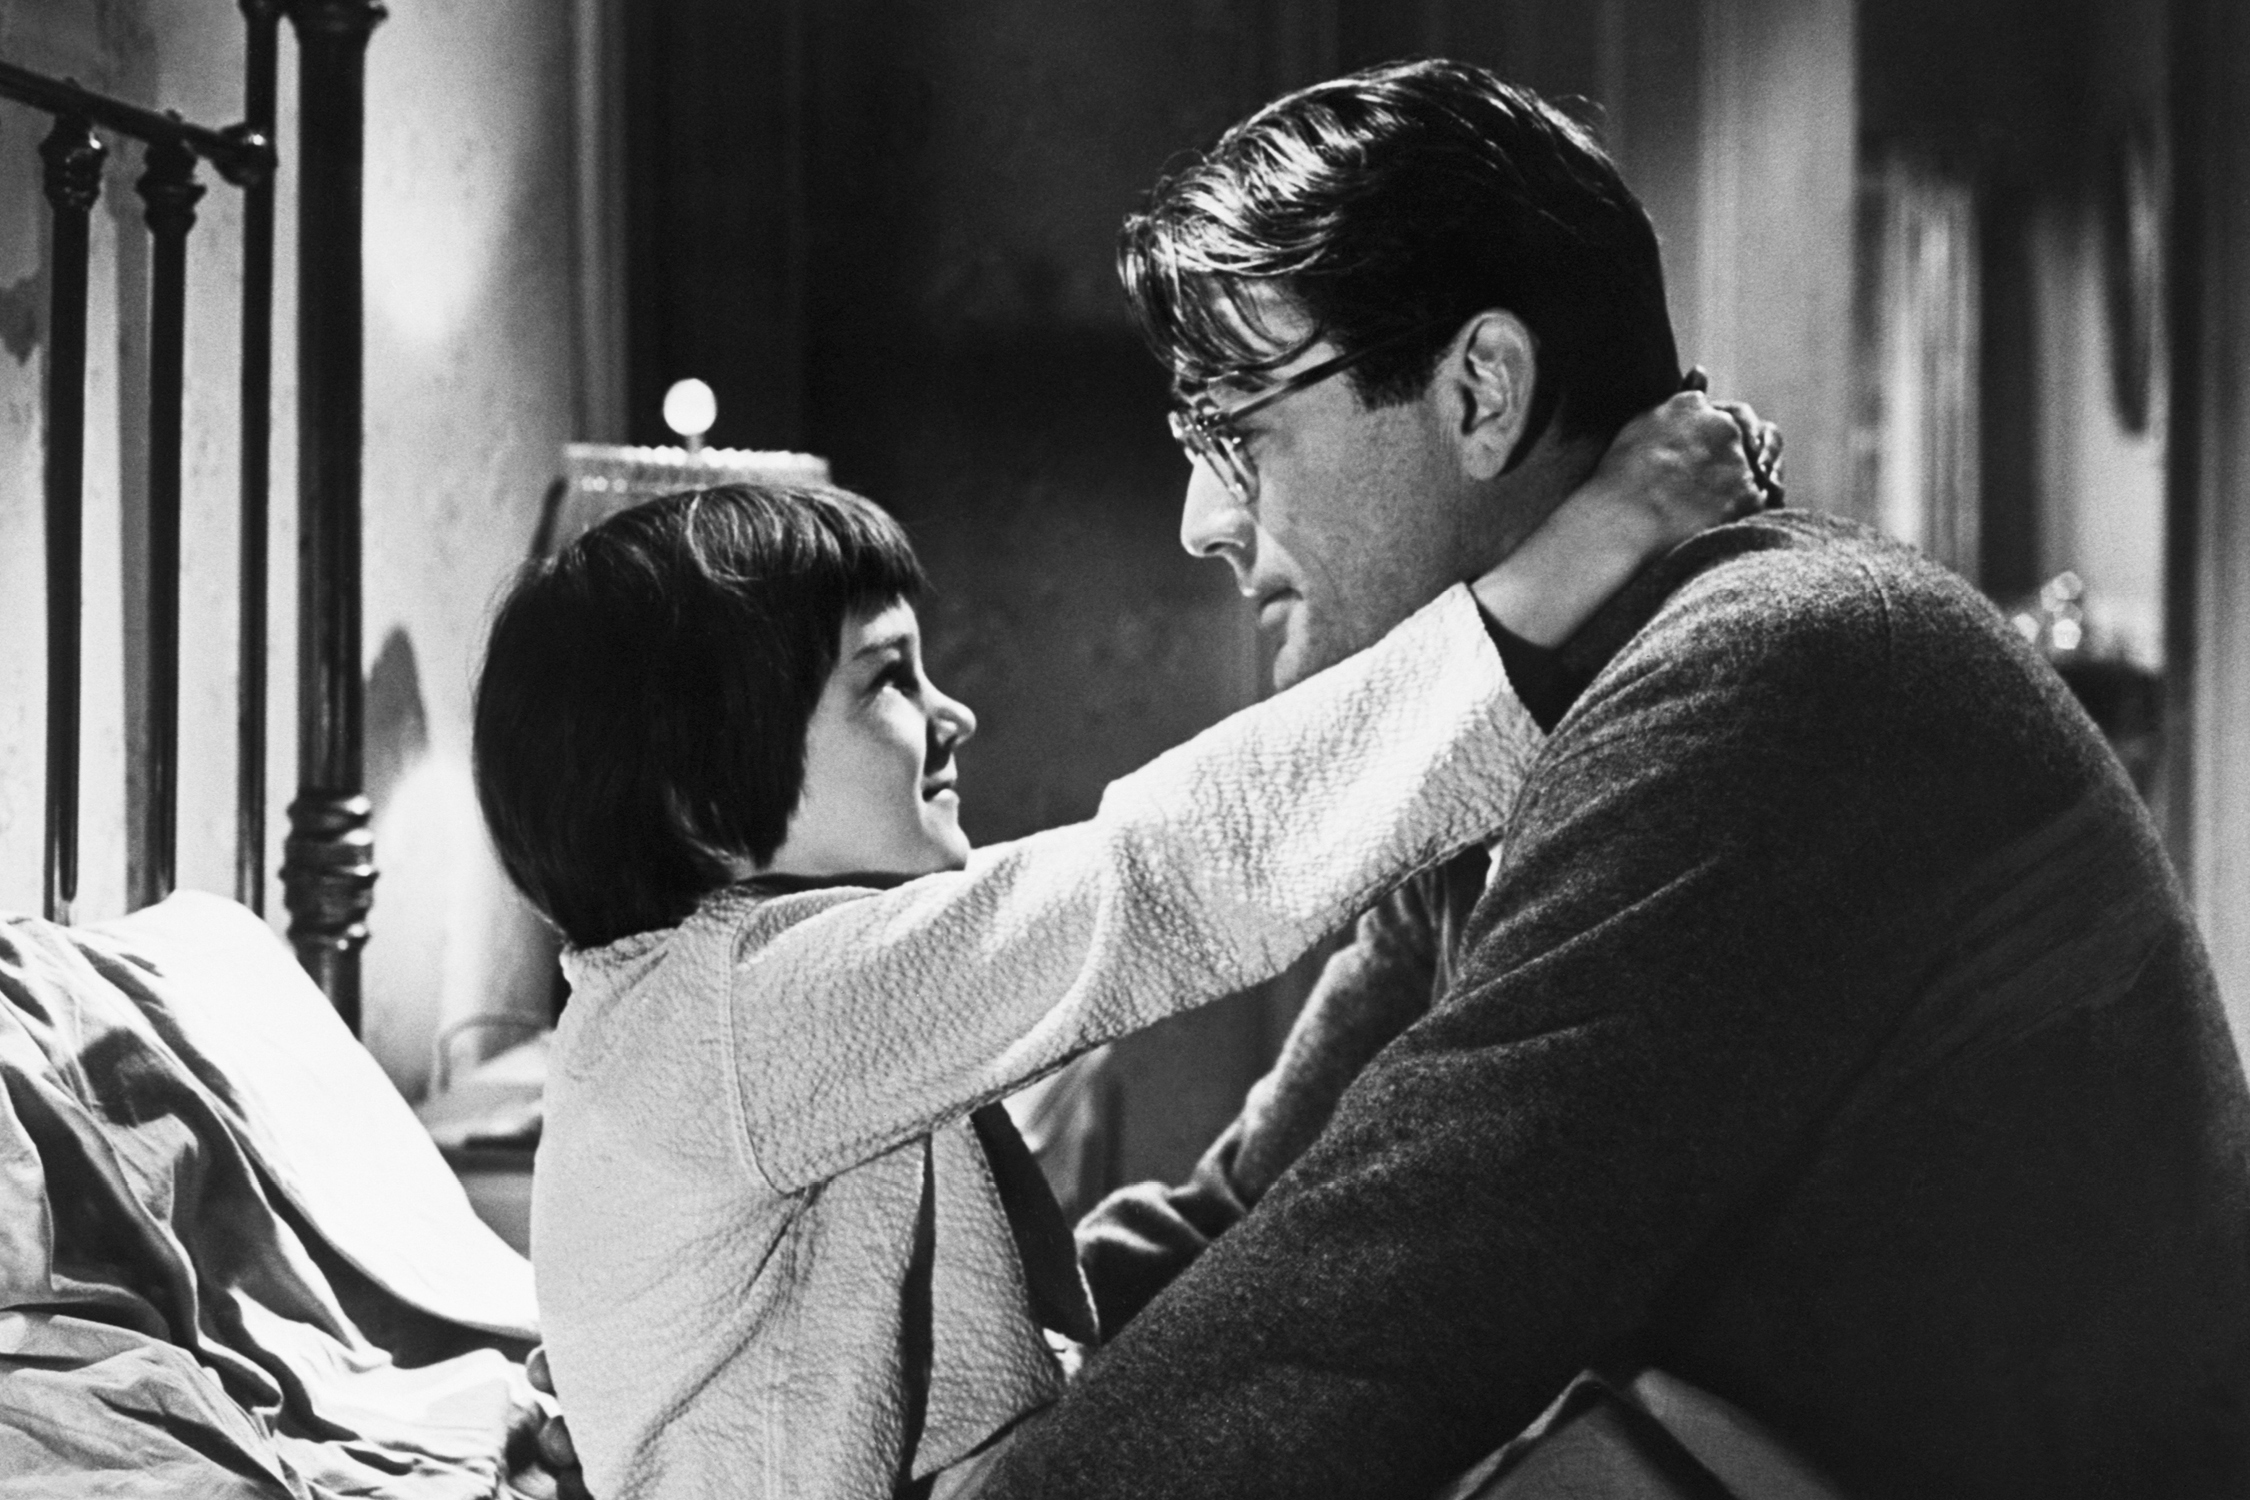 Atticus Finch, played here by Gregory Peck in the 1963 adaptation of Harper Lee's To Kill a Mockingbird, is one of literature's truly great dads. Image: Getty